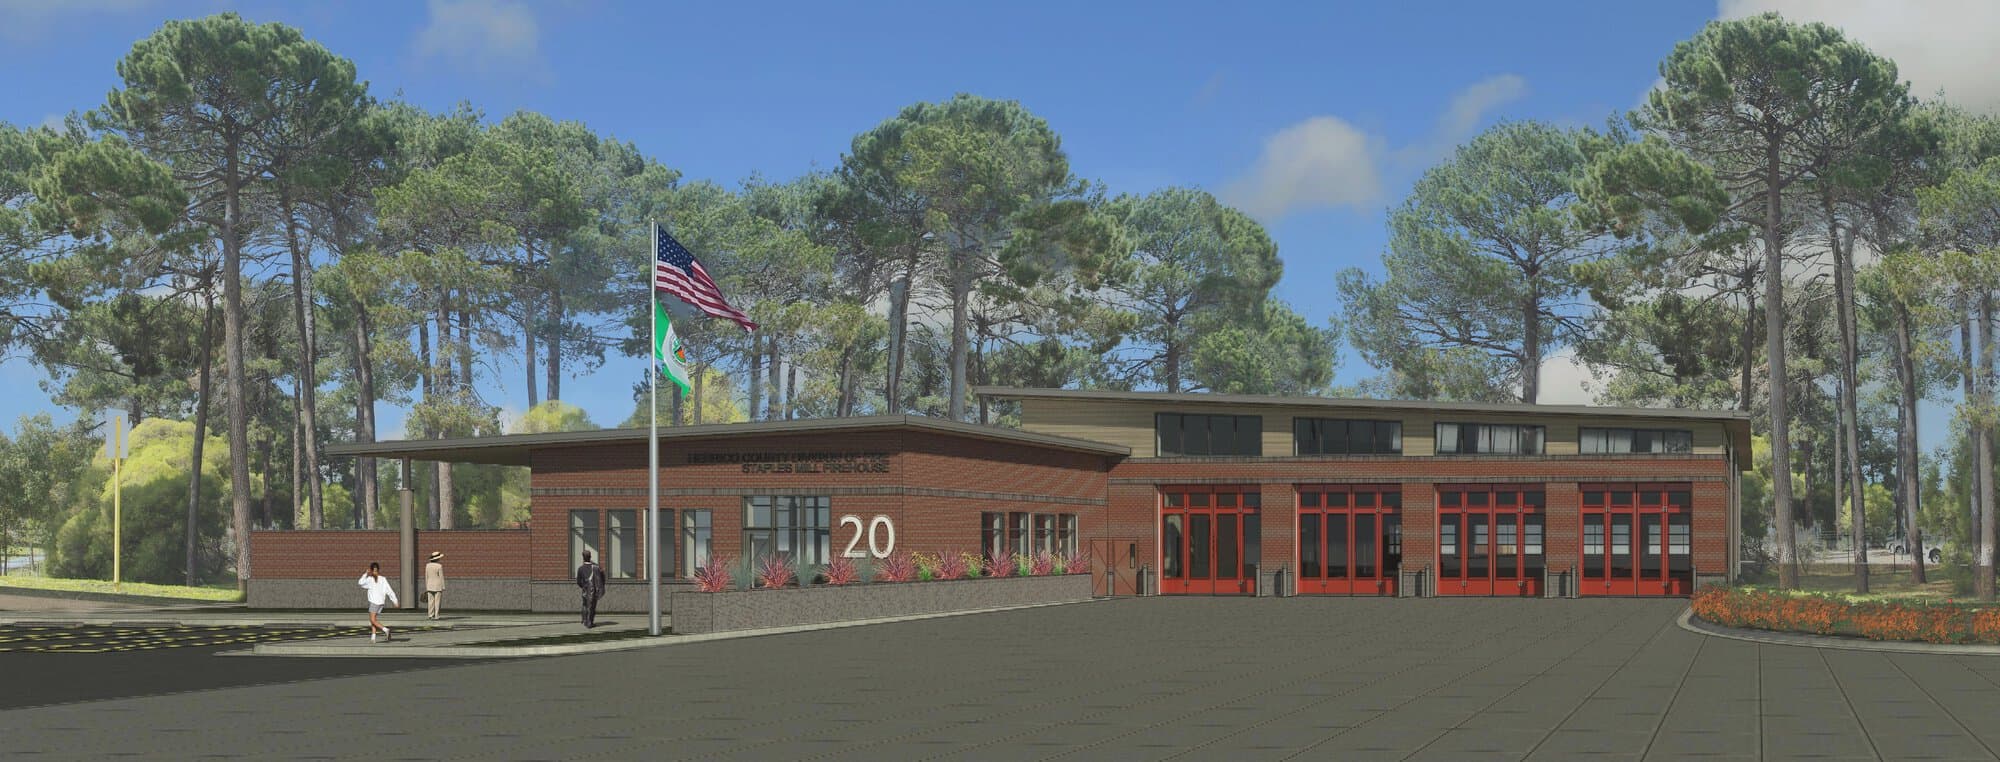 BKV Group was selected to design Fire House 20 – Staples Mill. The new station is similar to the Short Pump station but some elements will be adjusted, based on the results of a post-occupancy evaluation and survey of the firefighters. 